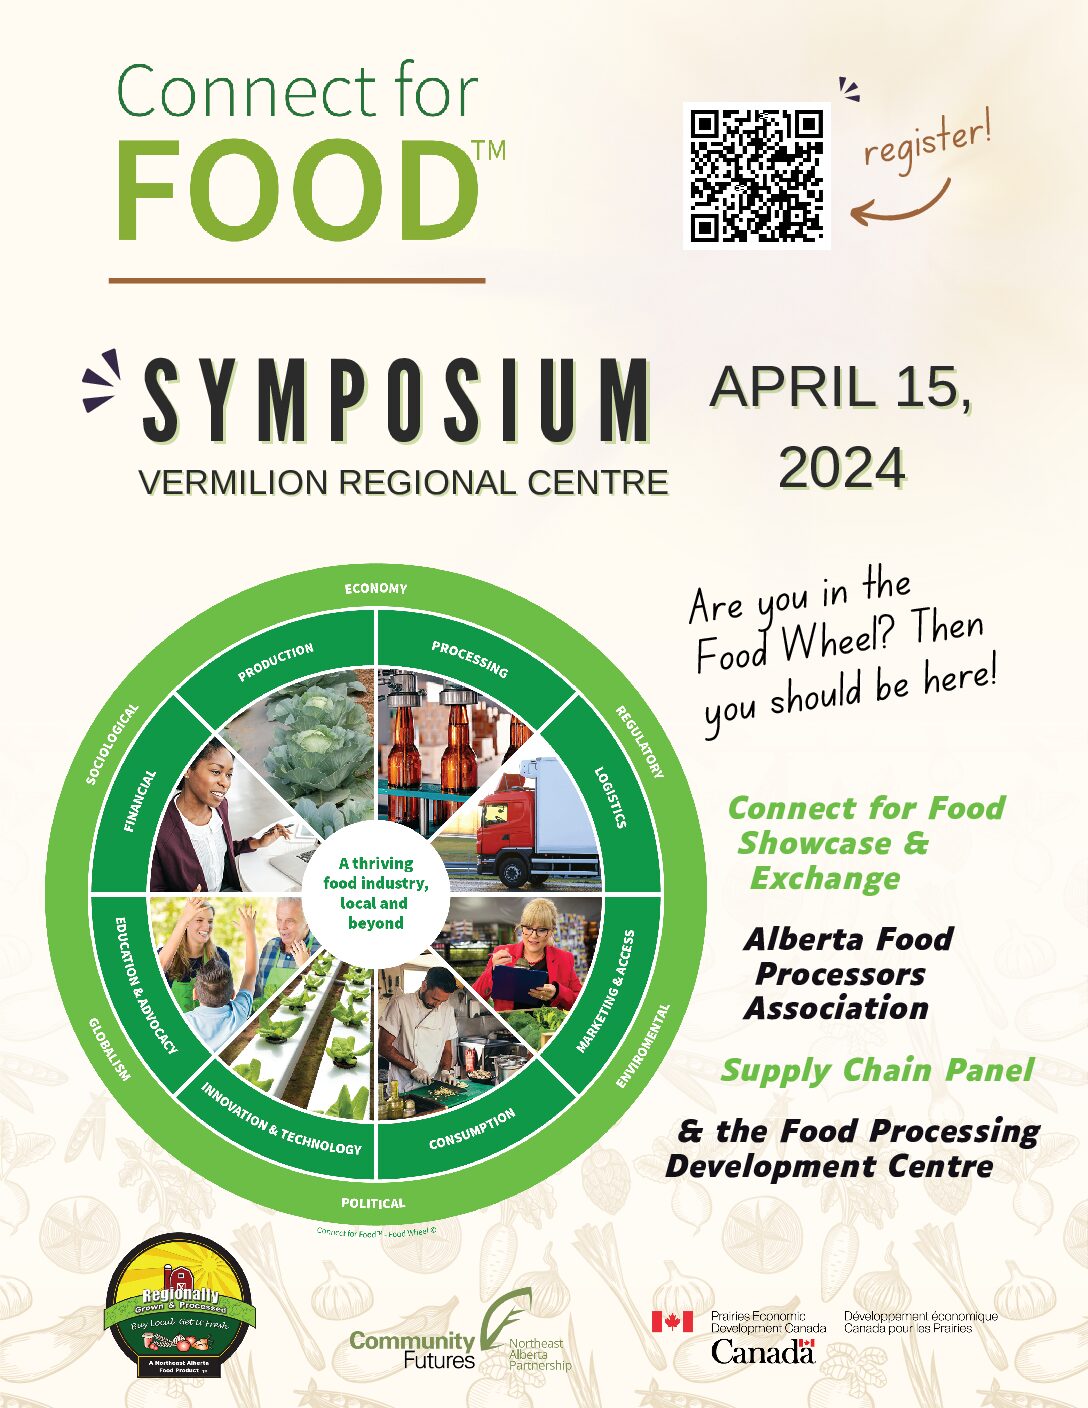 Connect for Food in Vermilion, Apr. 15